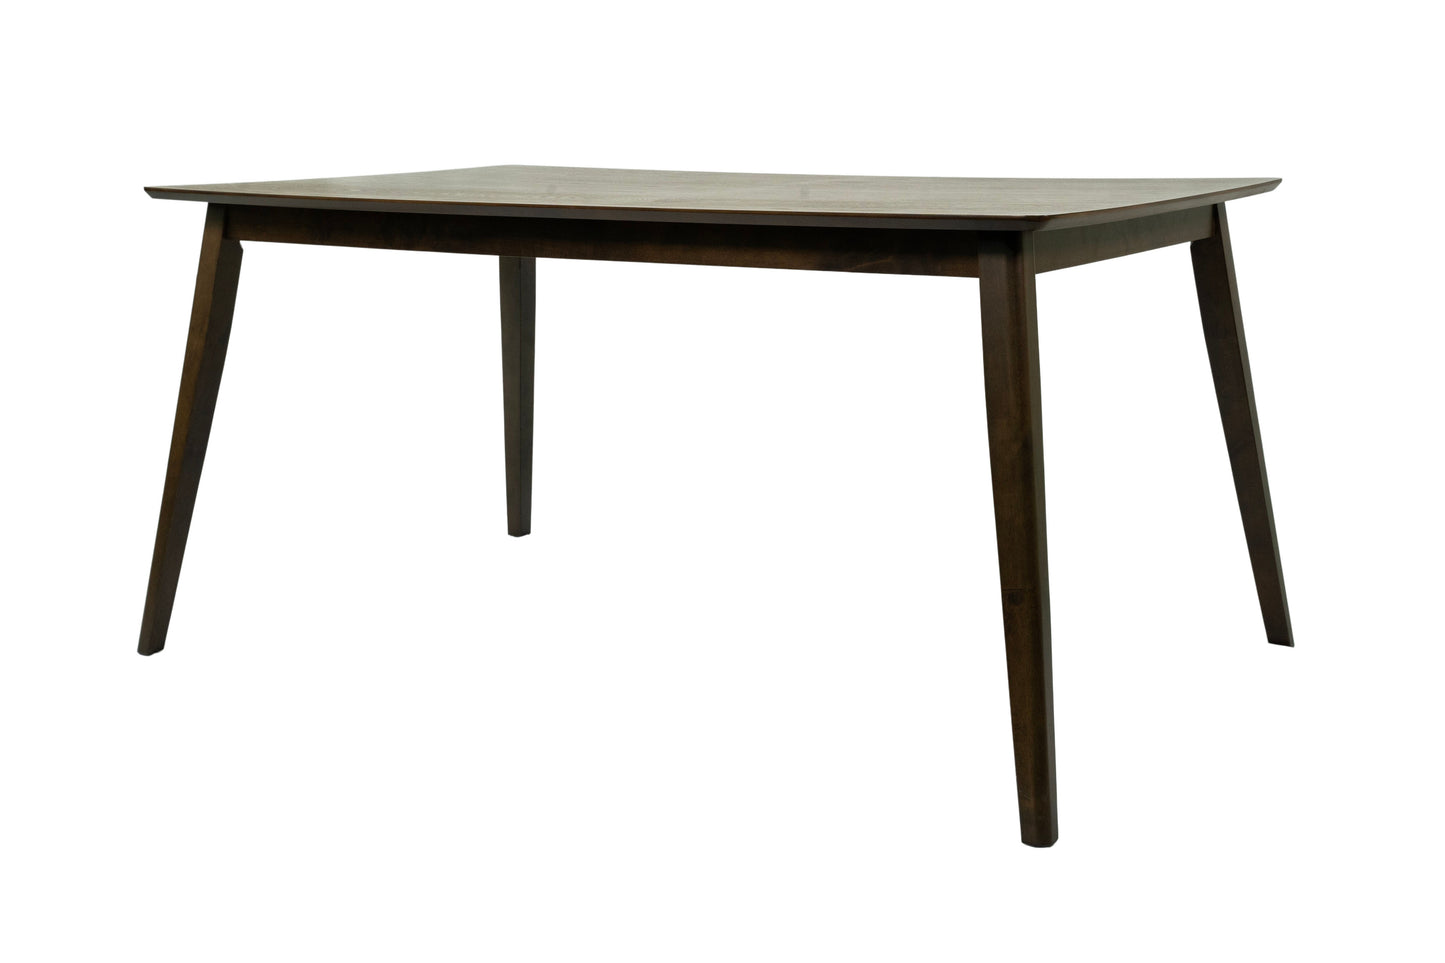 59" Promo Dining Table